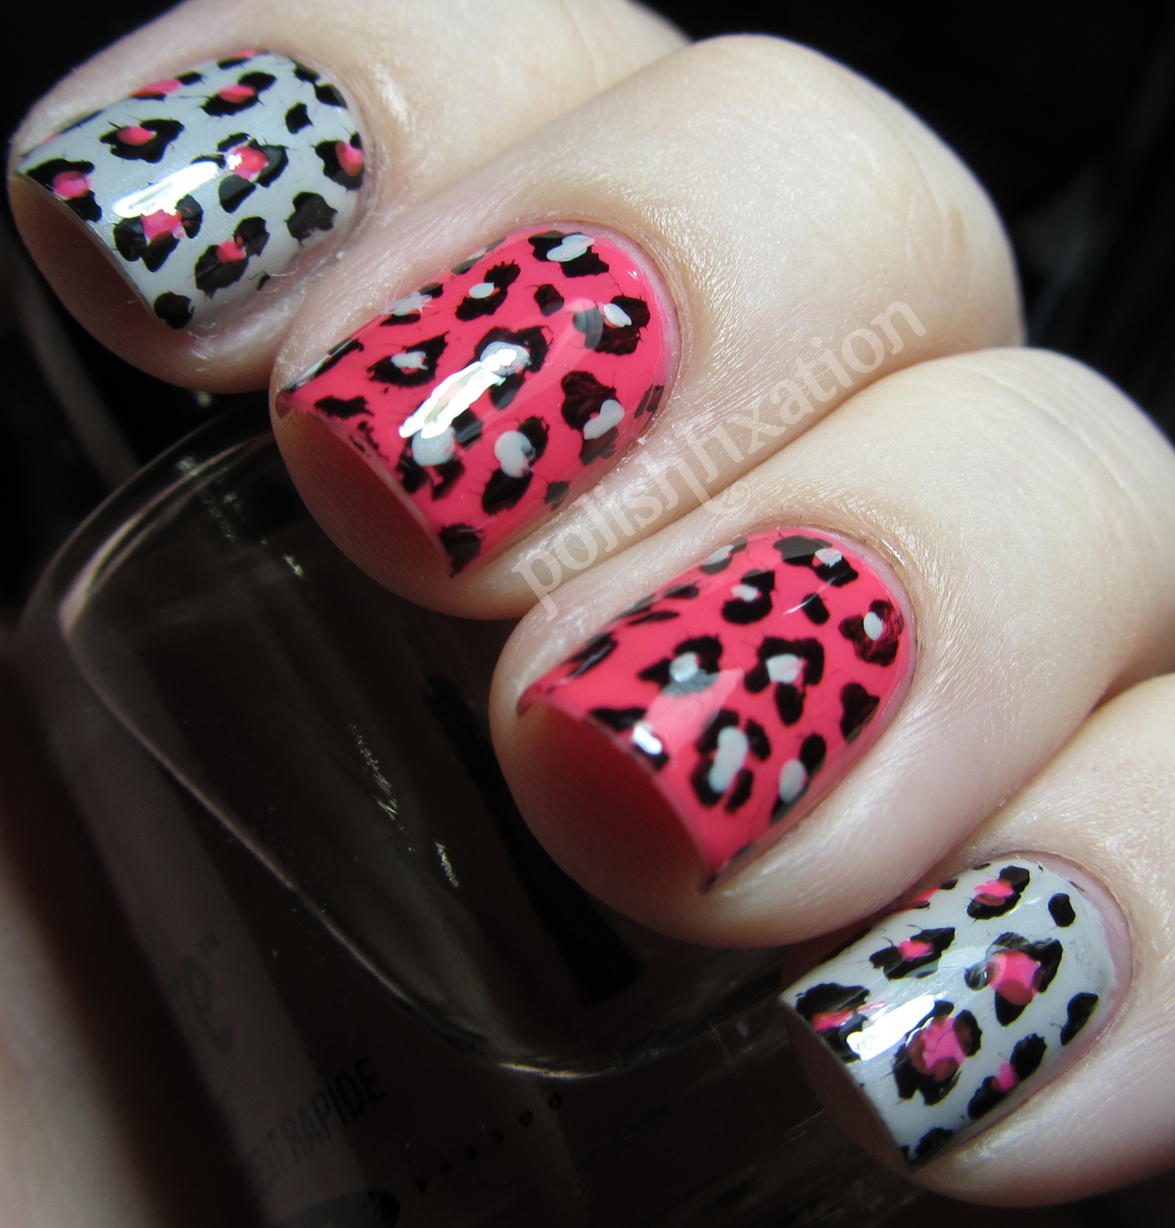 polish fixation: Edgy Leopard Print Stamping